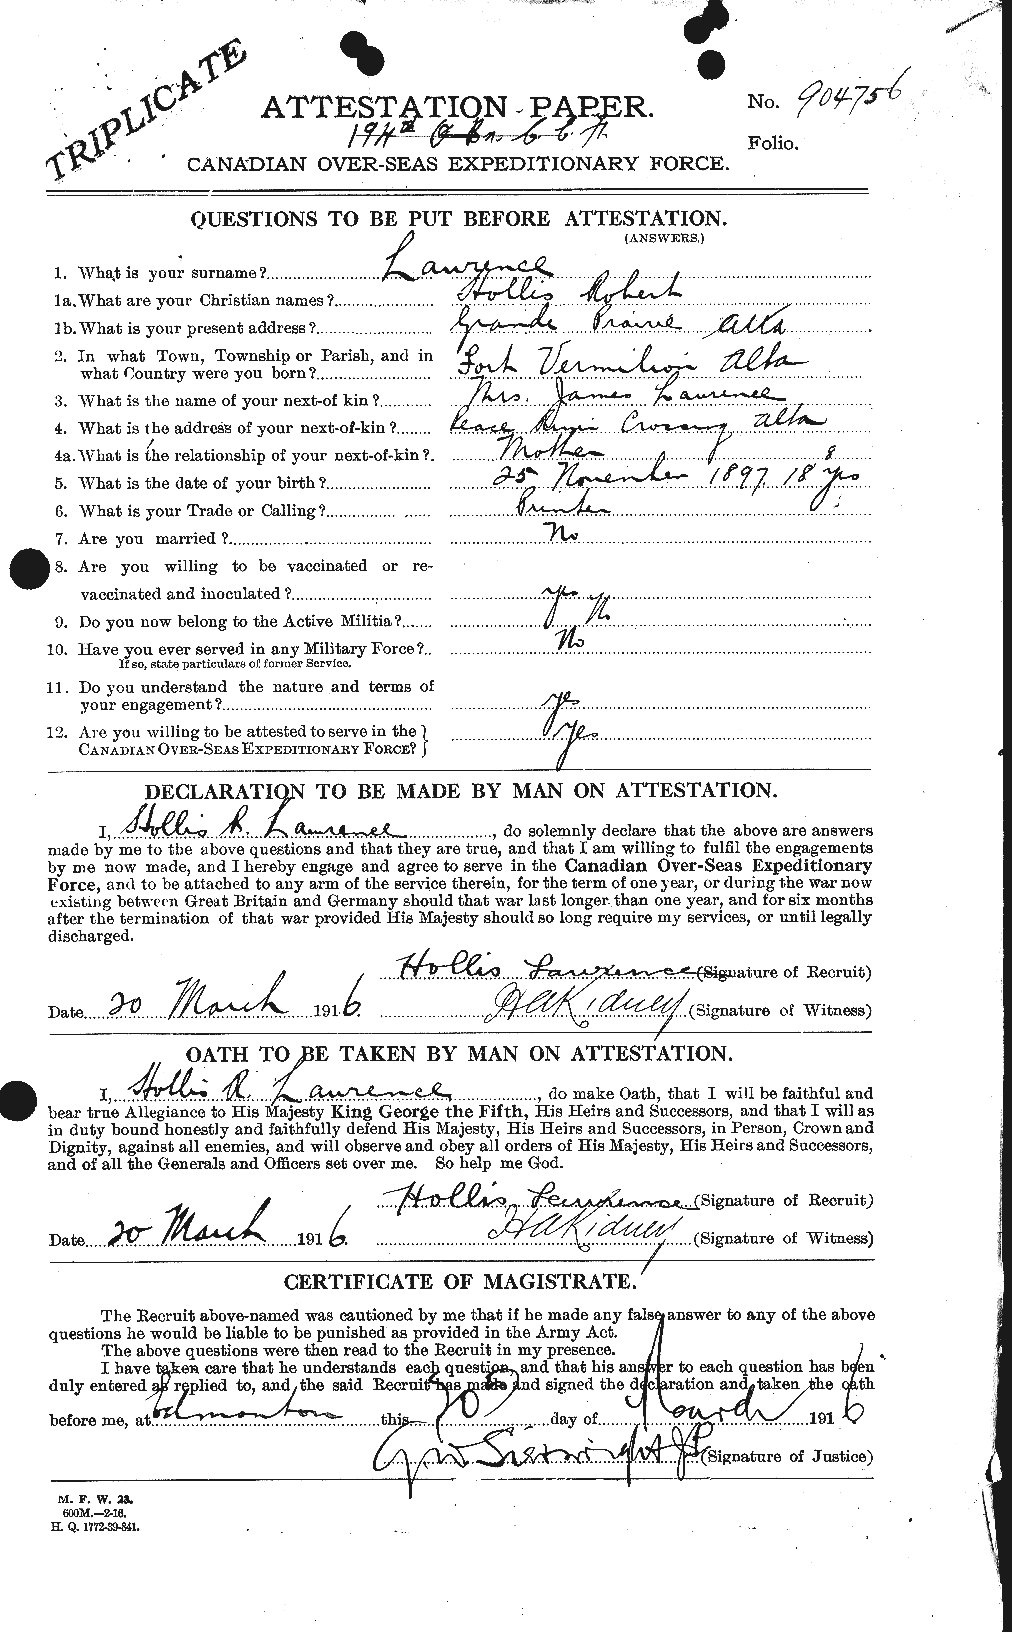 Personnel Records of the First World War - CEF 452328a